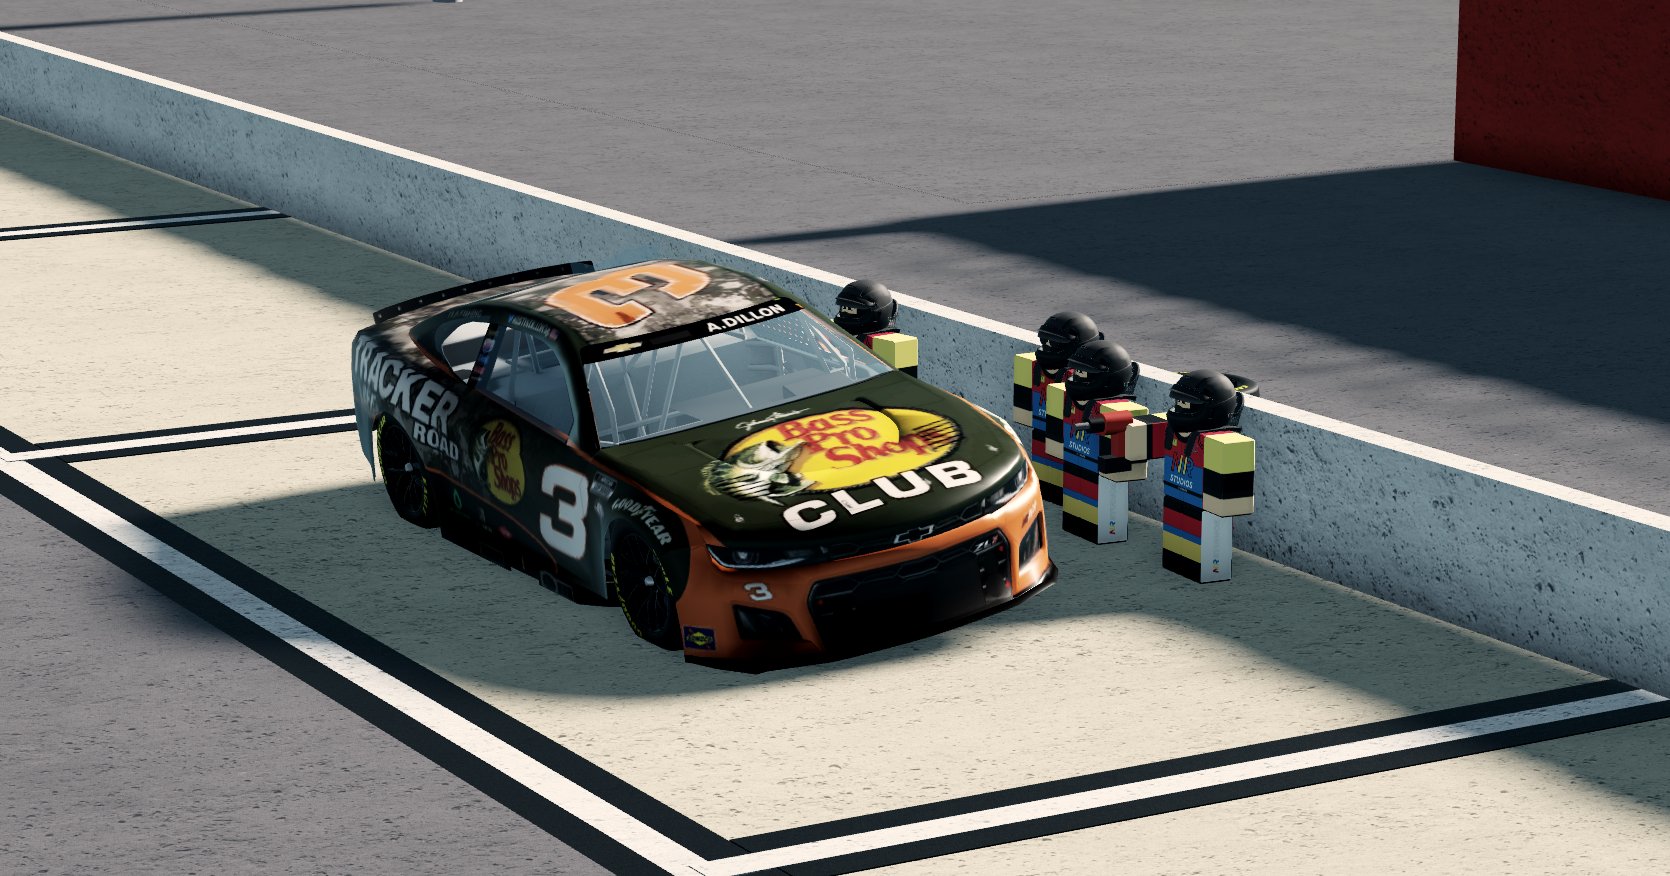 Racing in a public server in Just Daytona on Roblox 